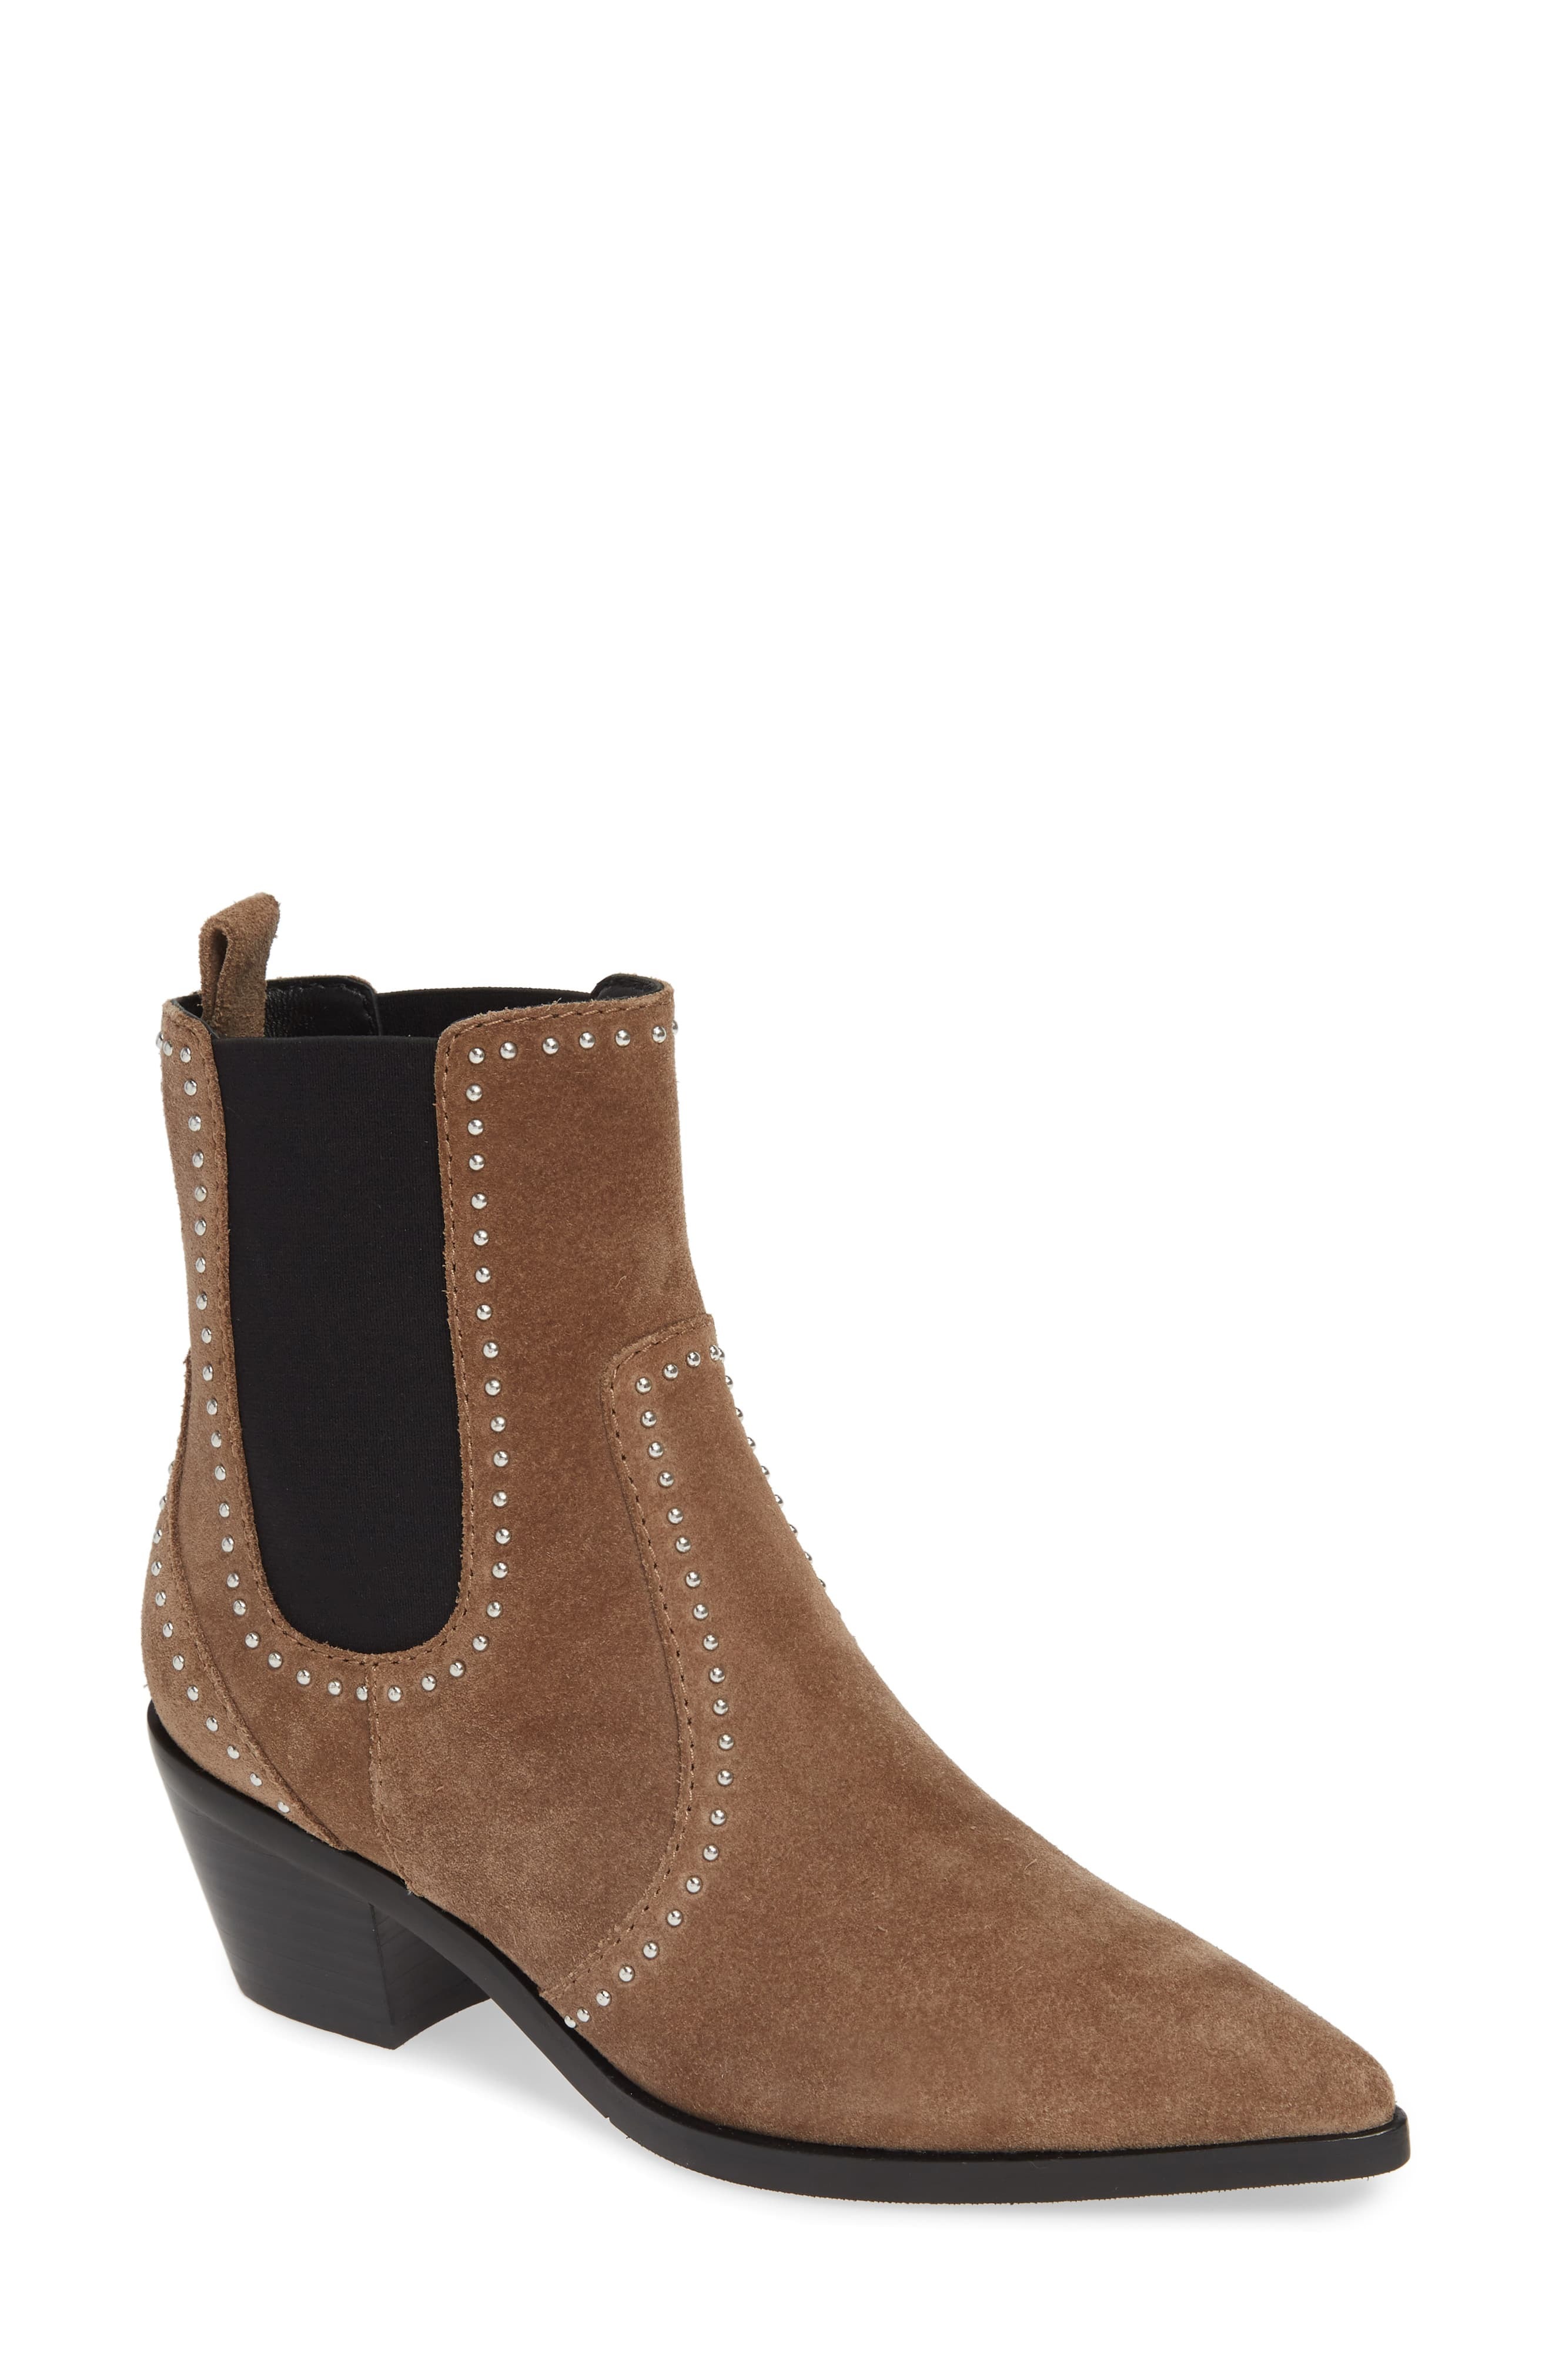 Paige Willa Studded Chelsea Boot, $149 